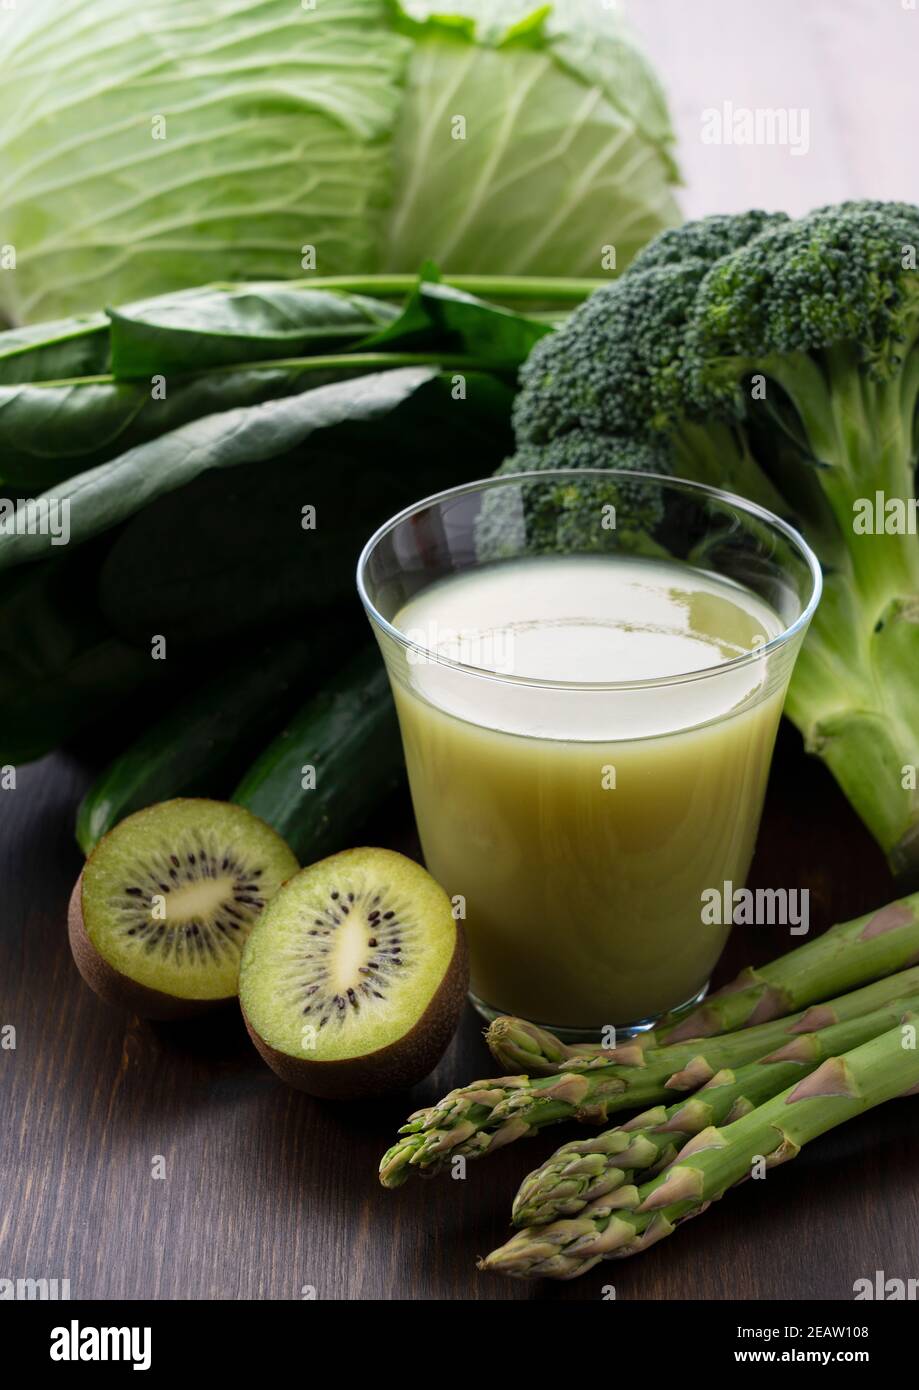 A lot of green vegetables placed on a wooden background and a glass of vegetable juice Stock Photo